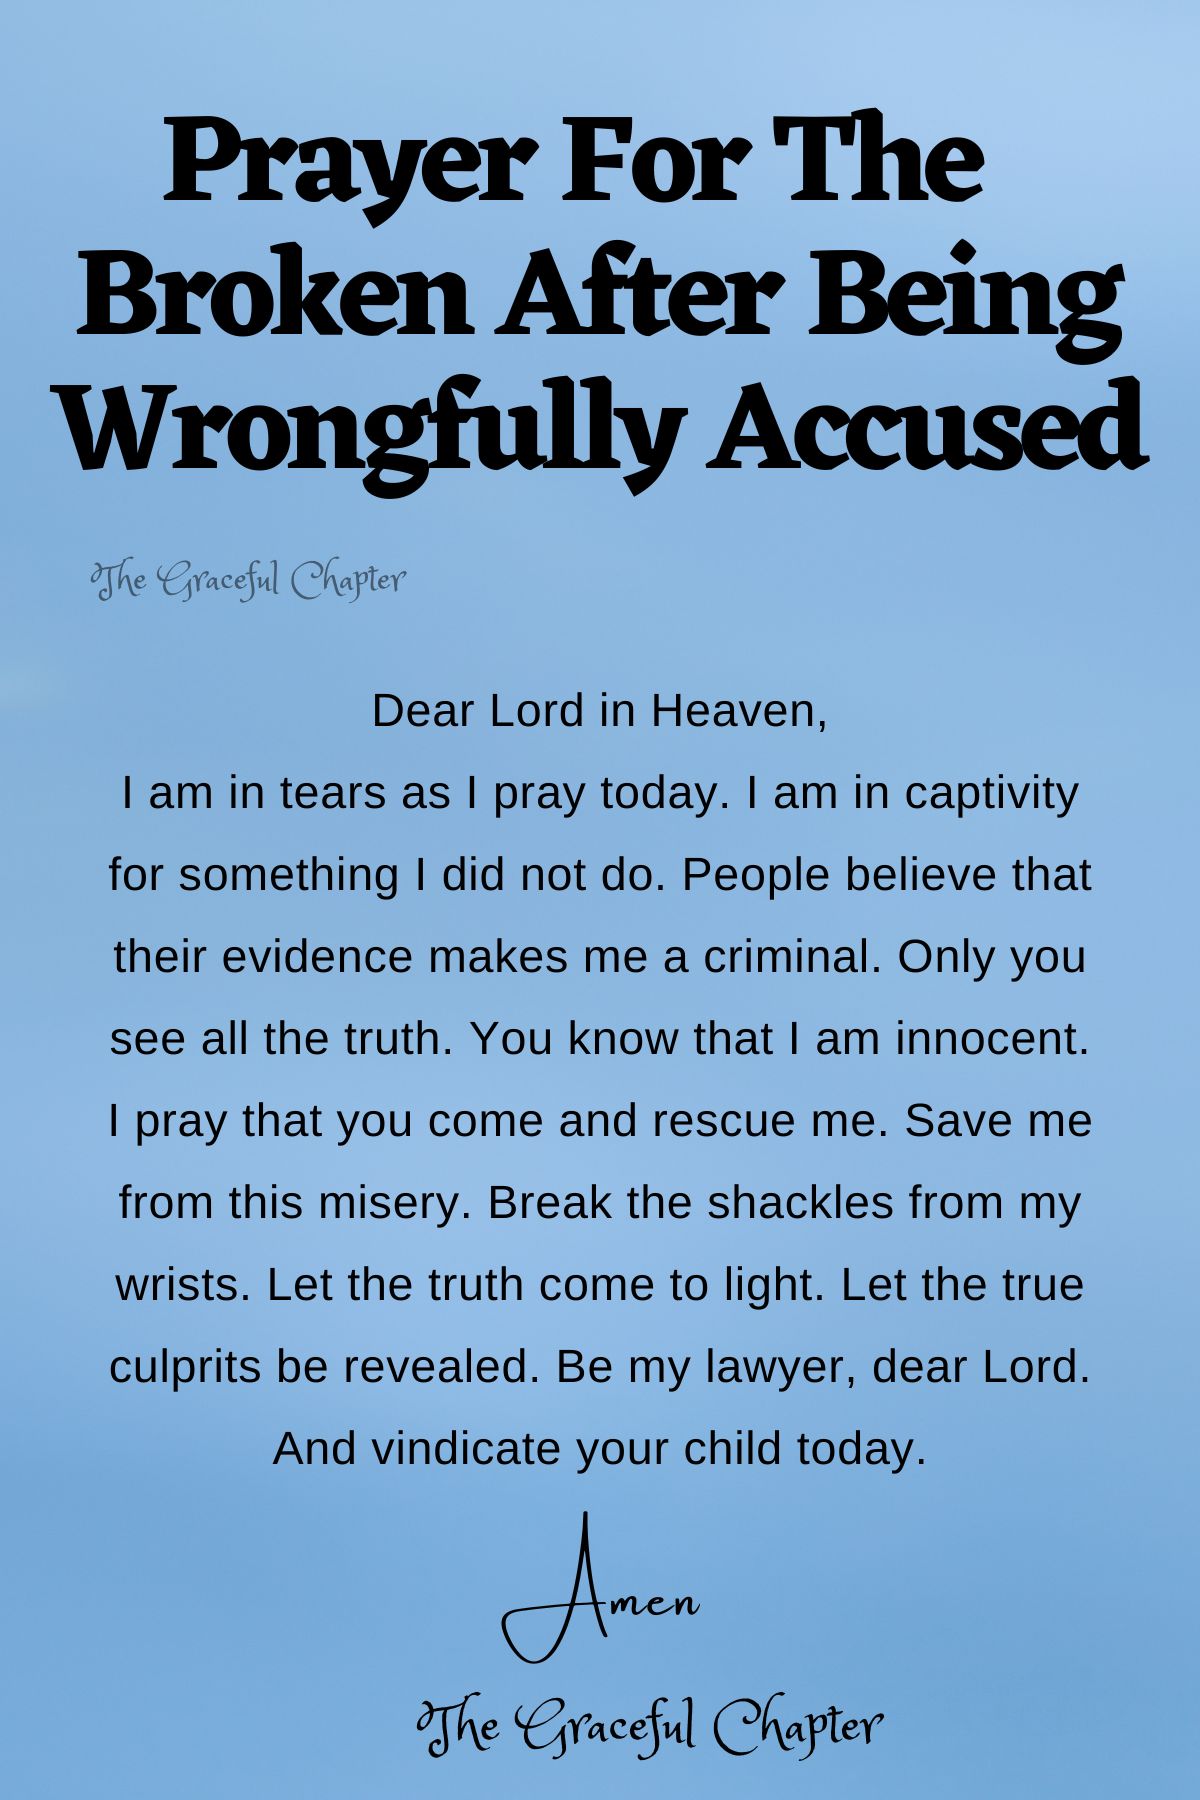 For the broken after being wrongfully accused